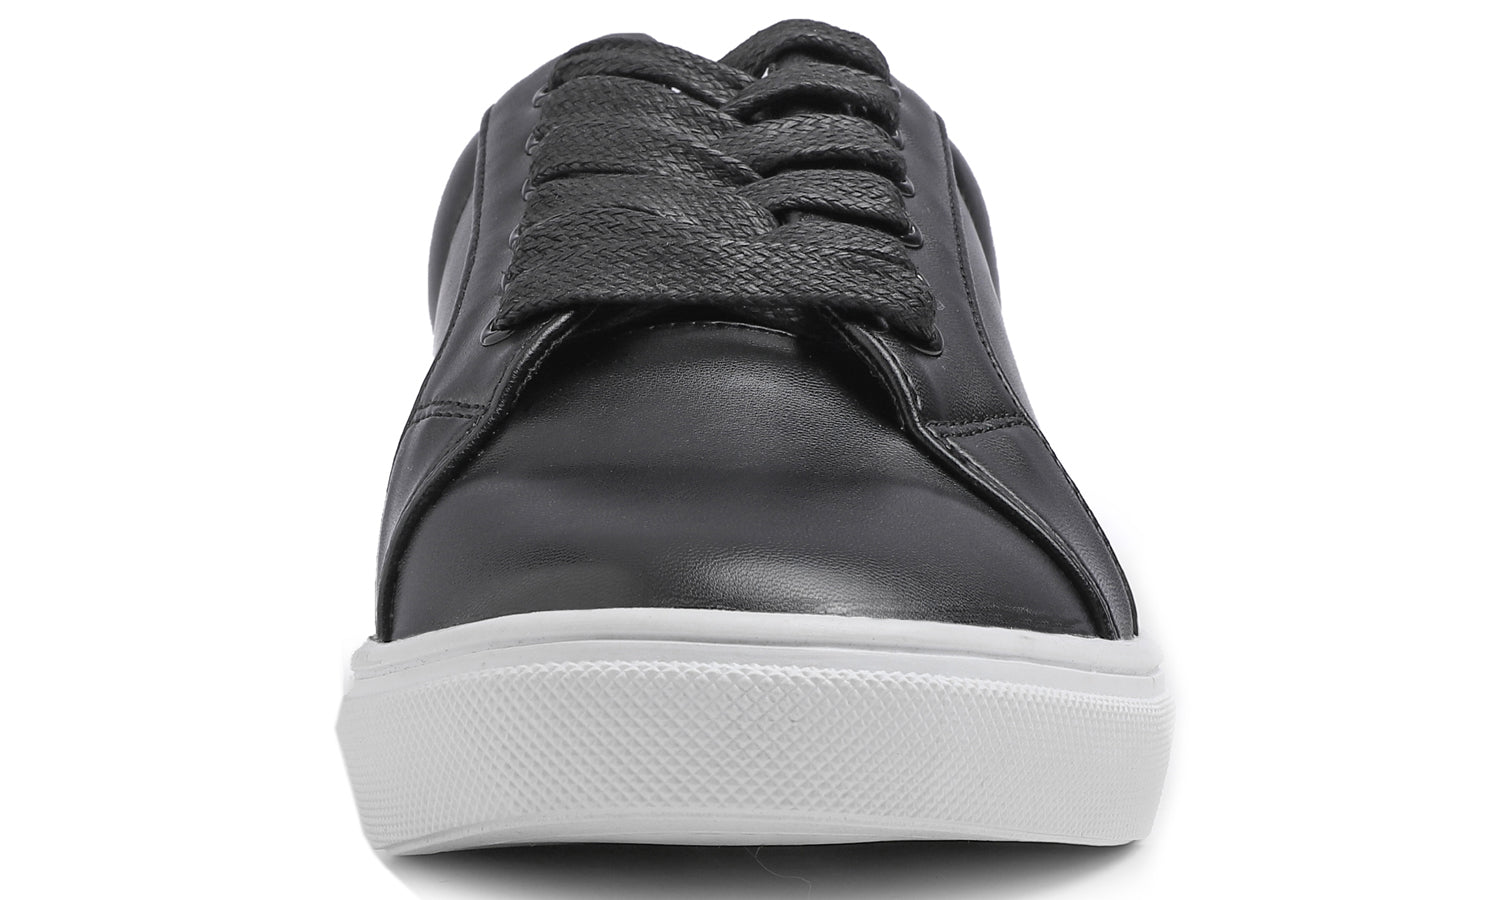 Feversole Women's Featured PU Leather Black Lace-Up Sneaker